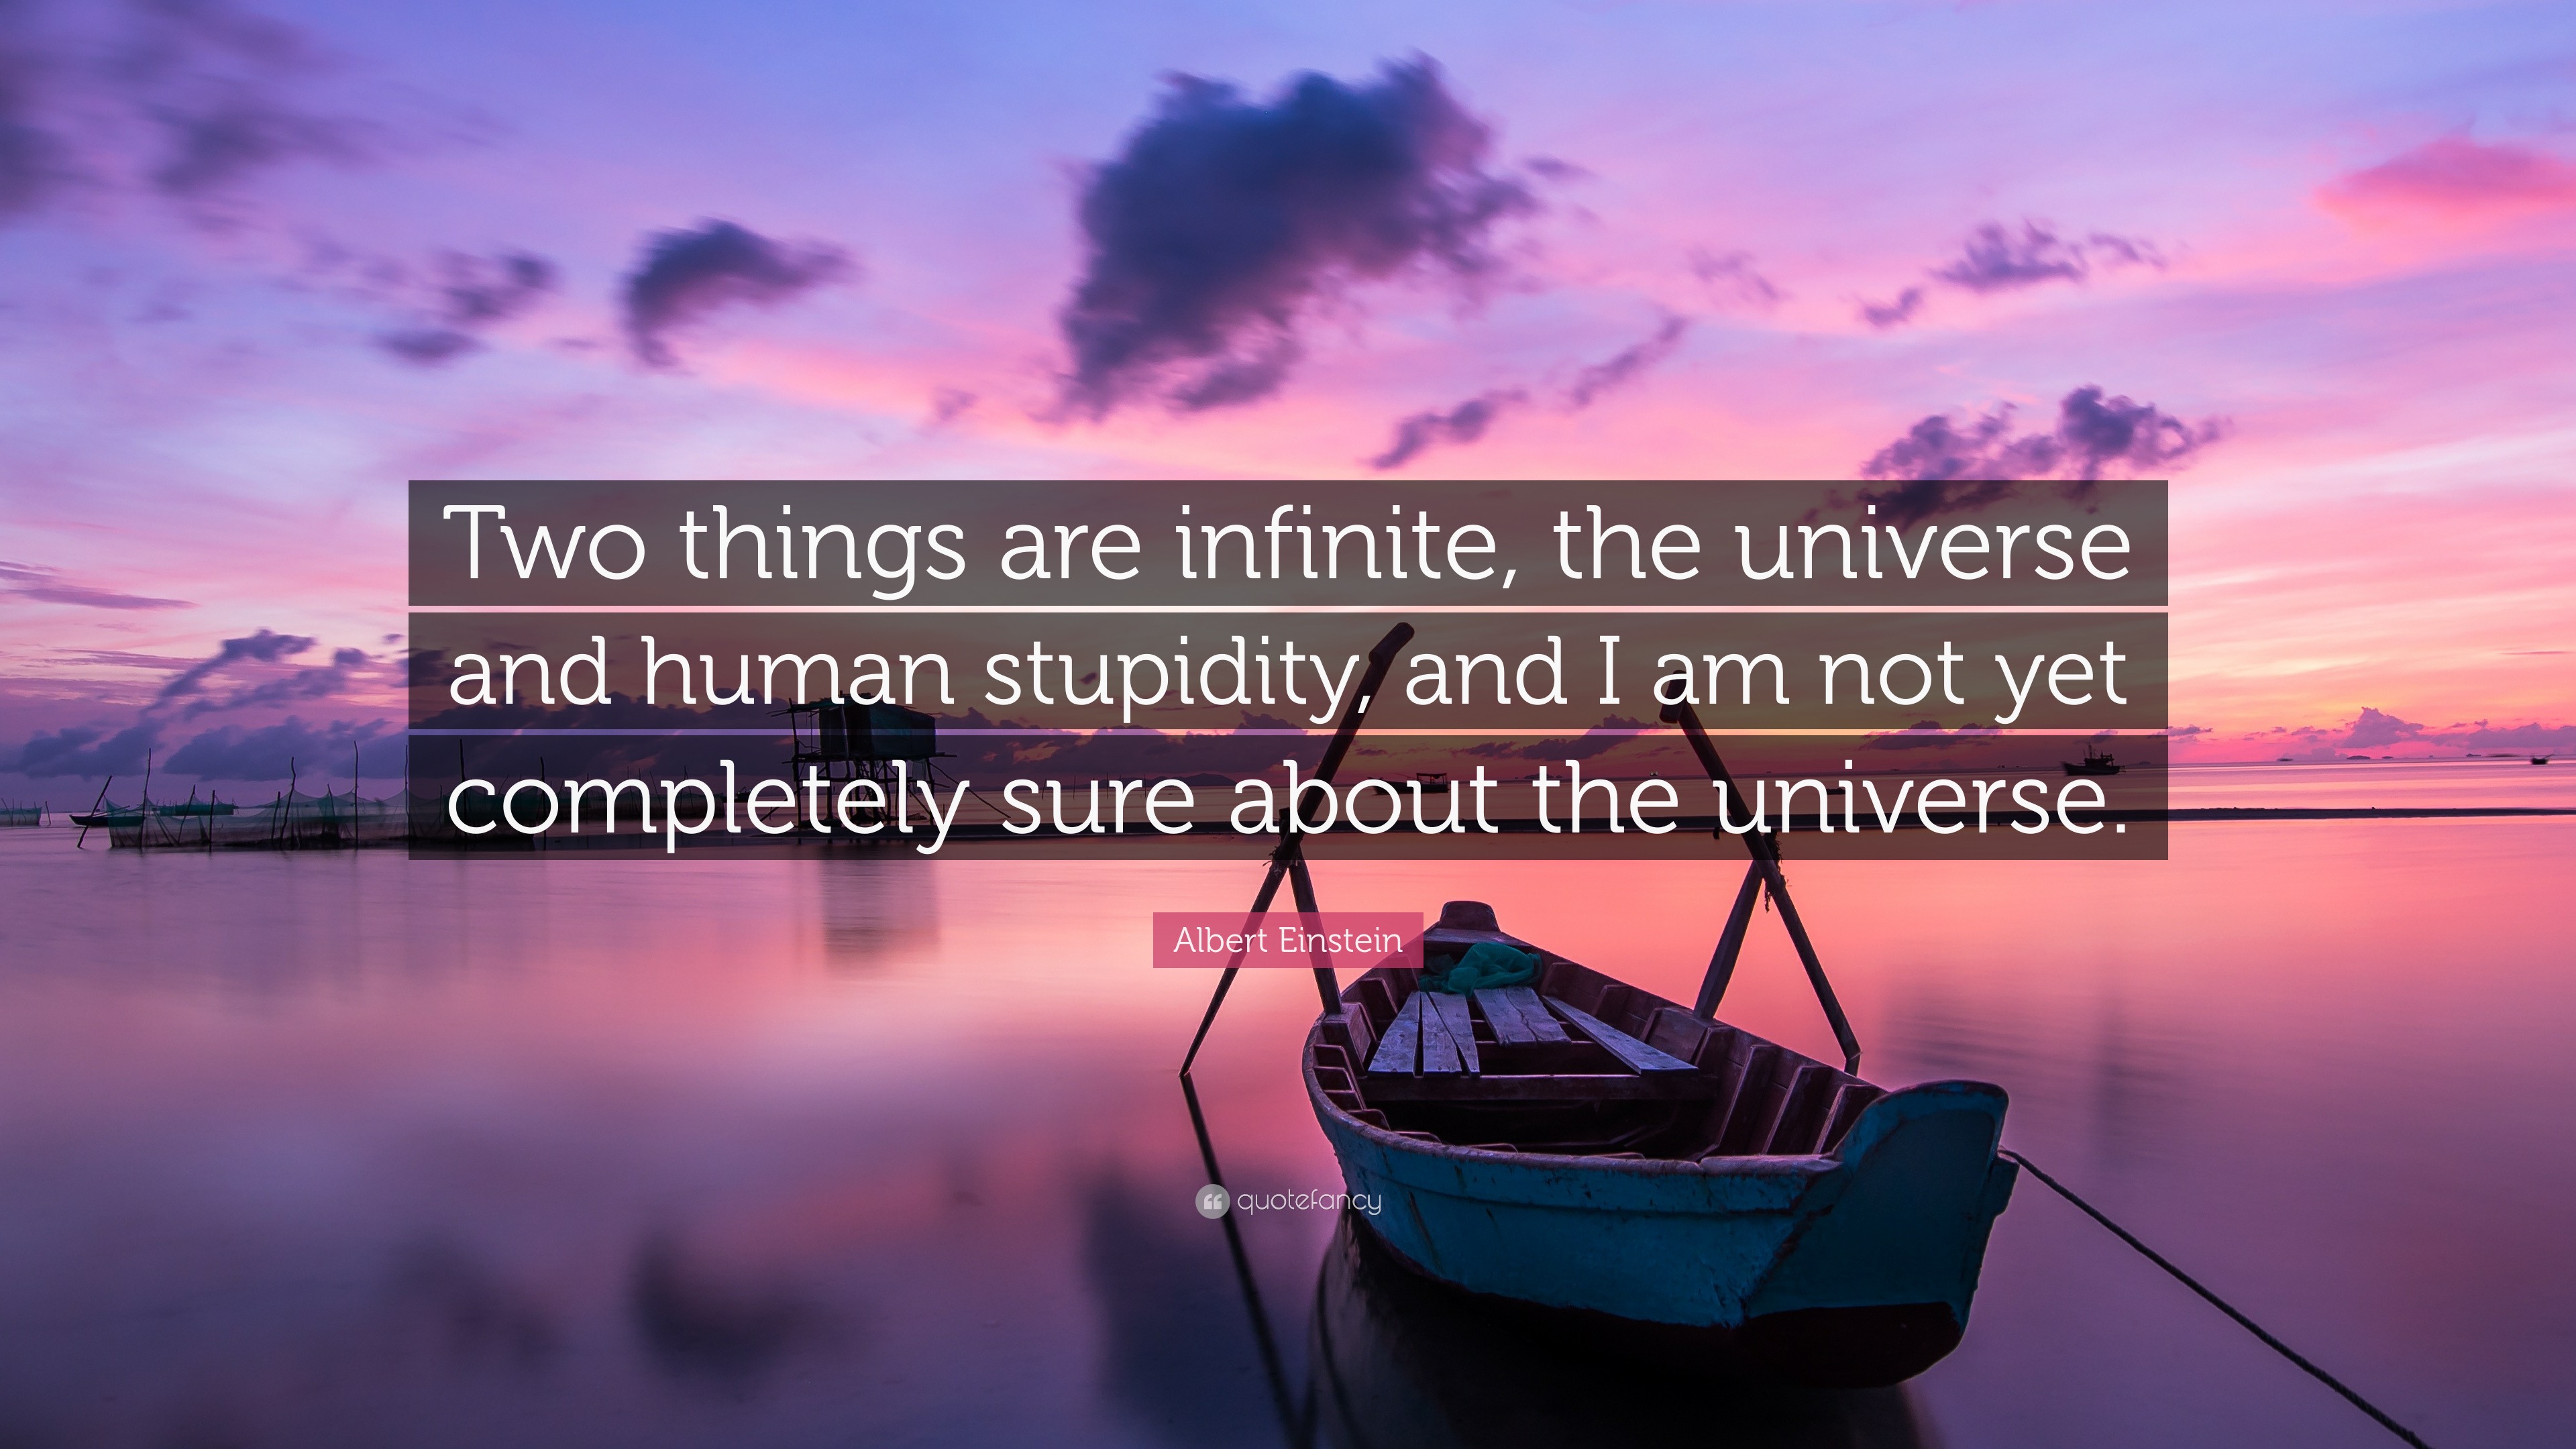 Albert Einstein Quote: “Two things are infinite, the universe and human